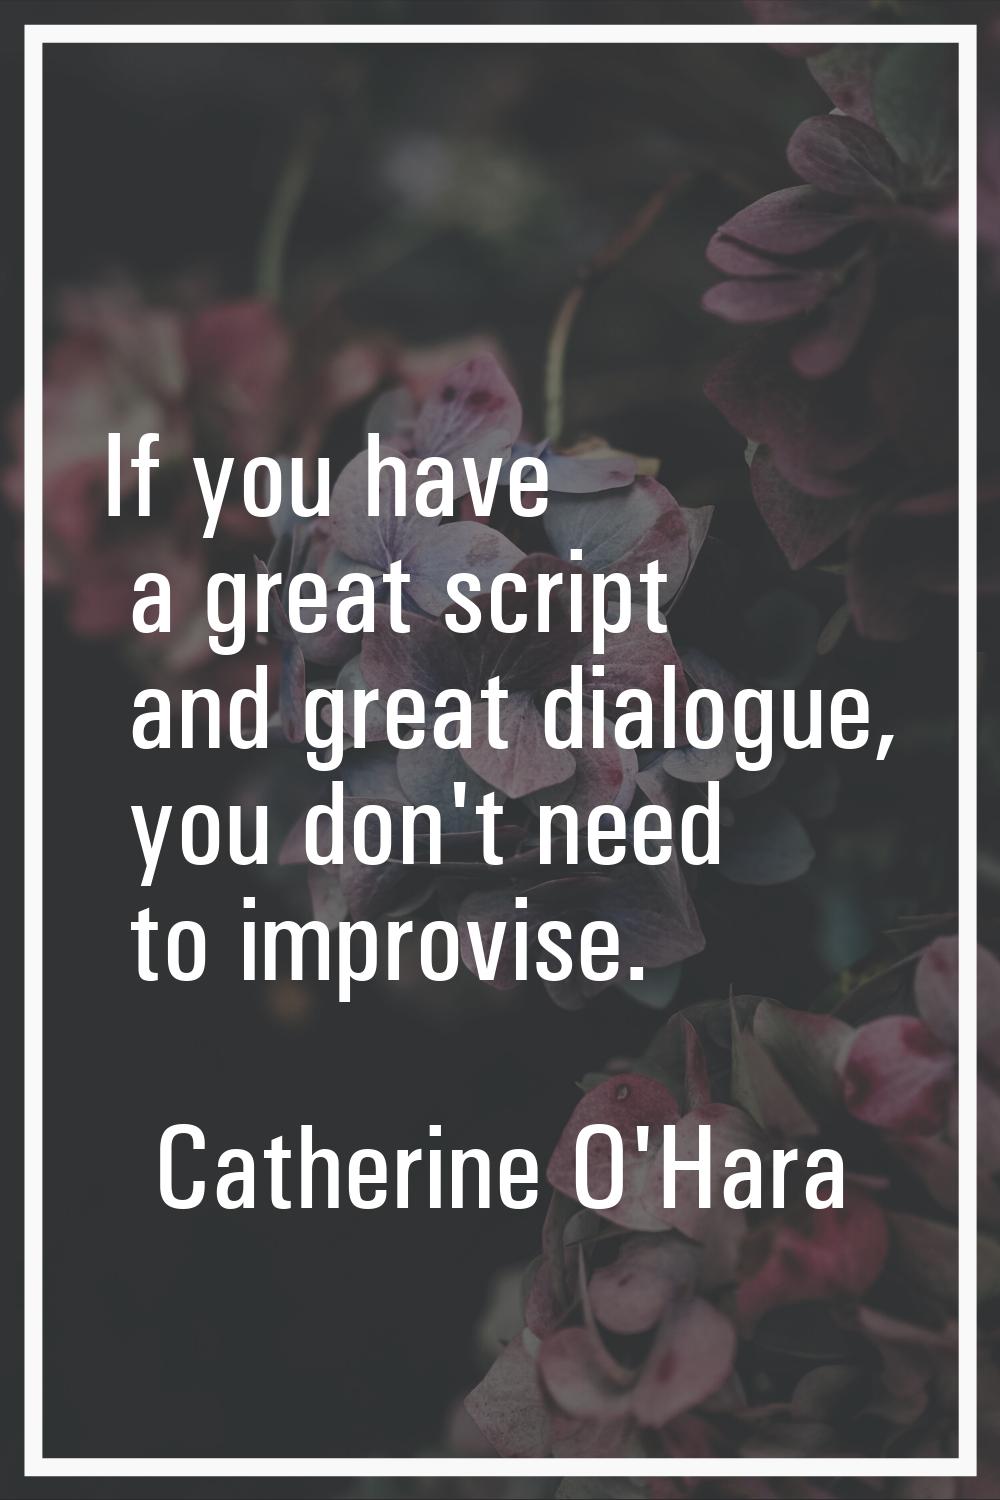 If you have a great script and great dialogue, you don't need to improvise.